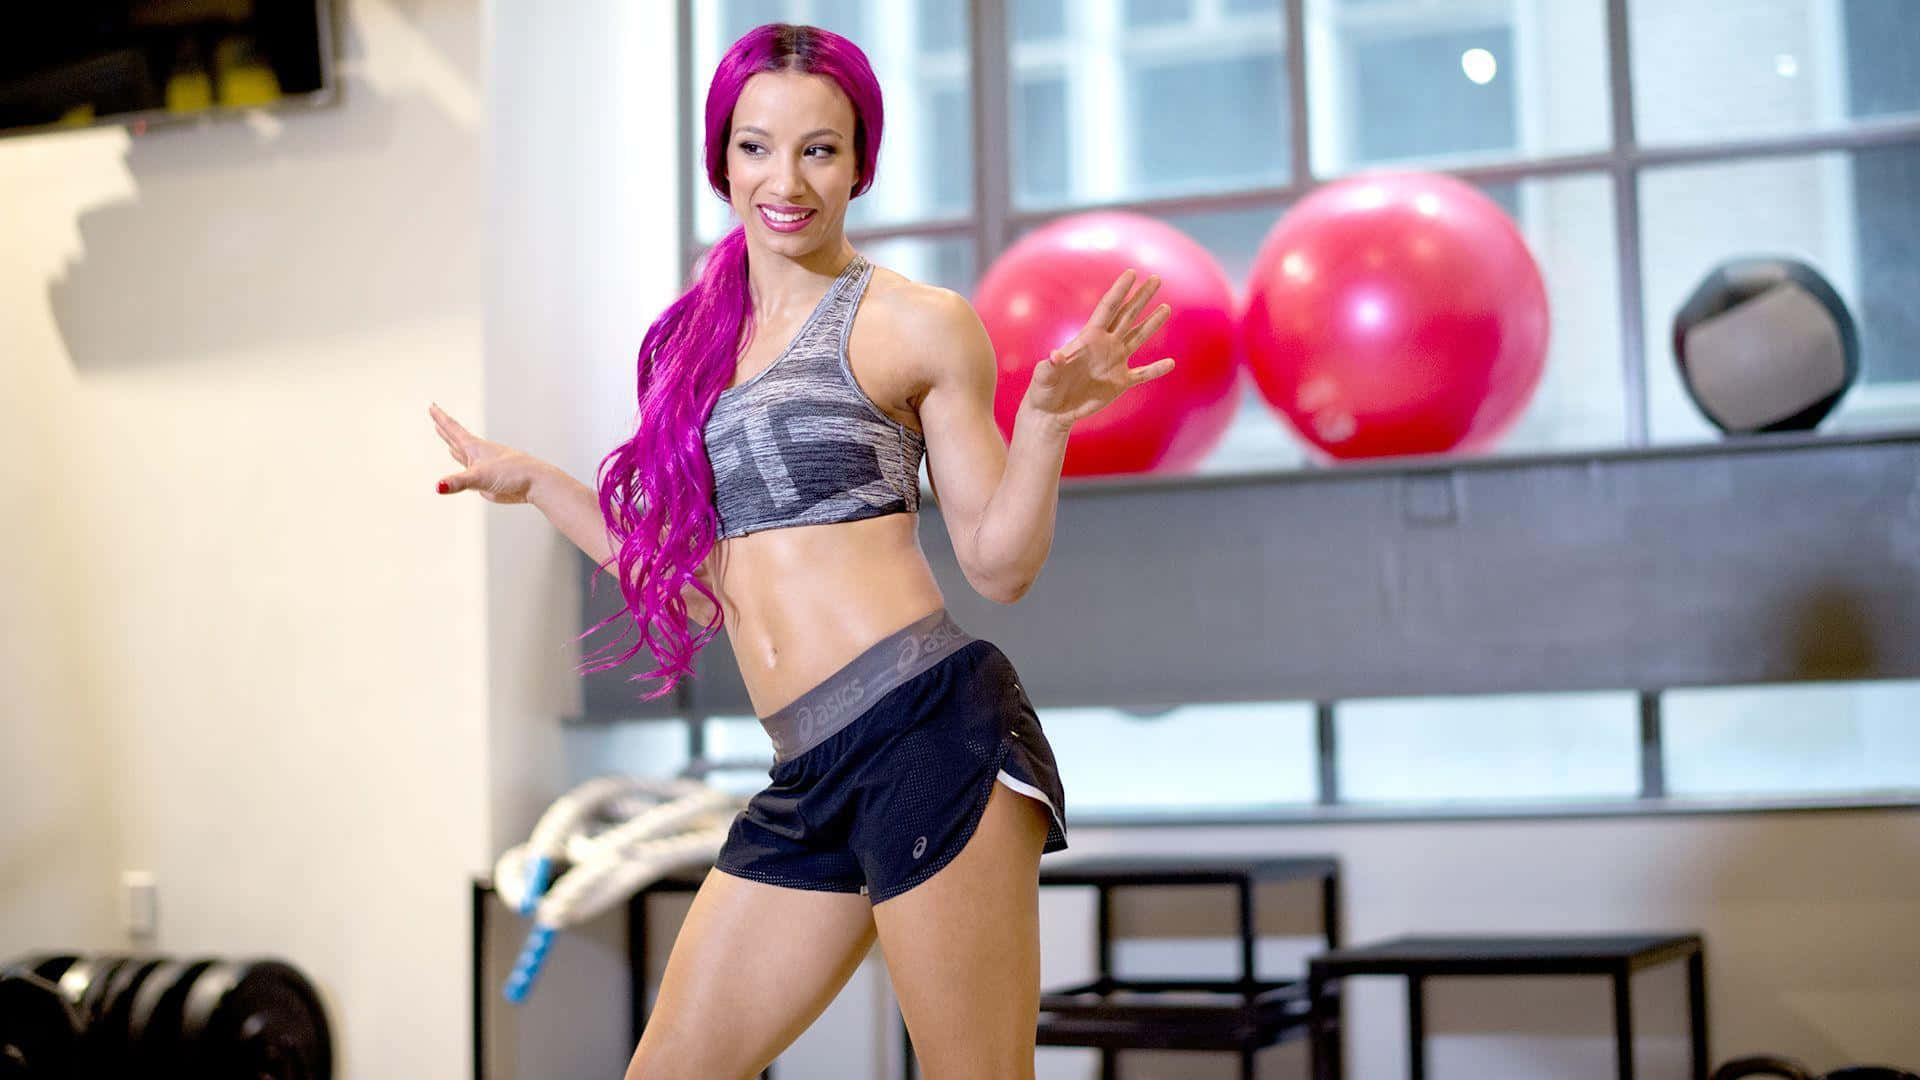 A Woman With Purple Hair Standing In A Gym